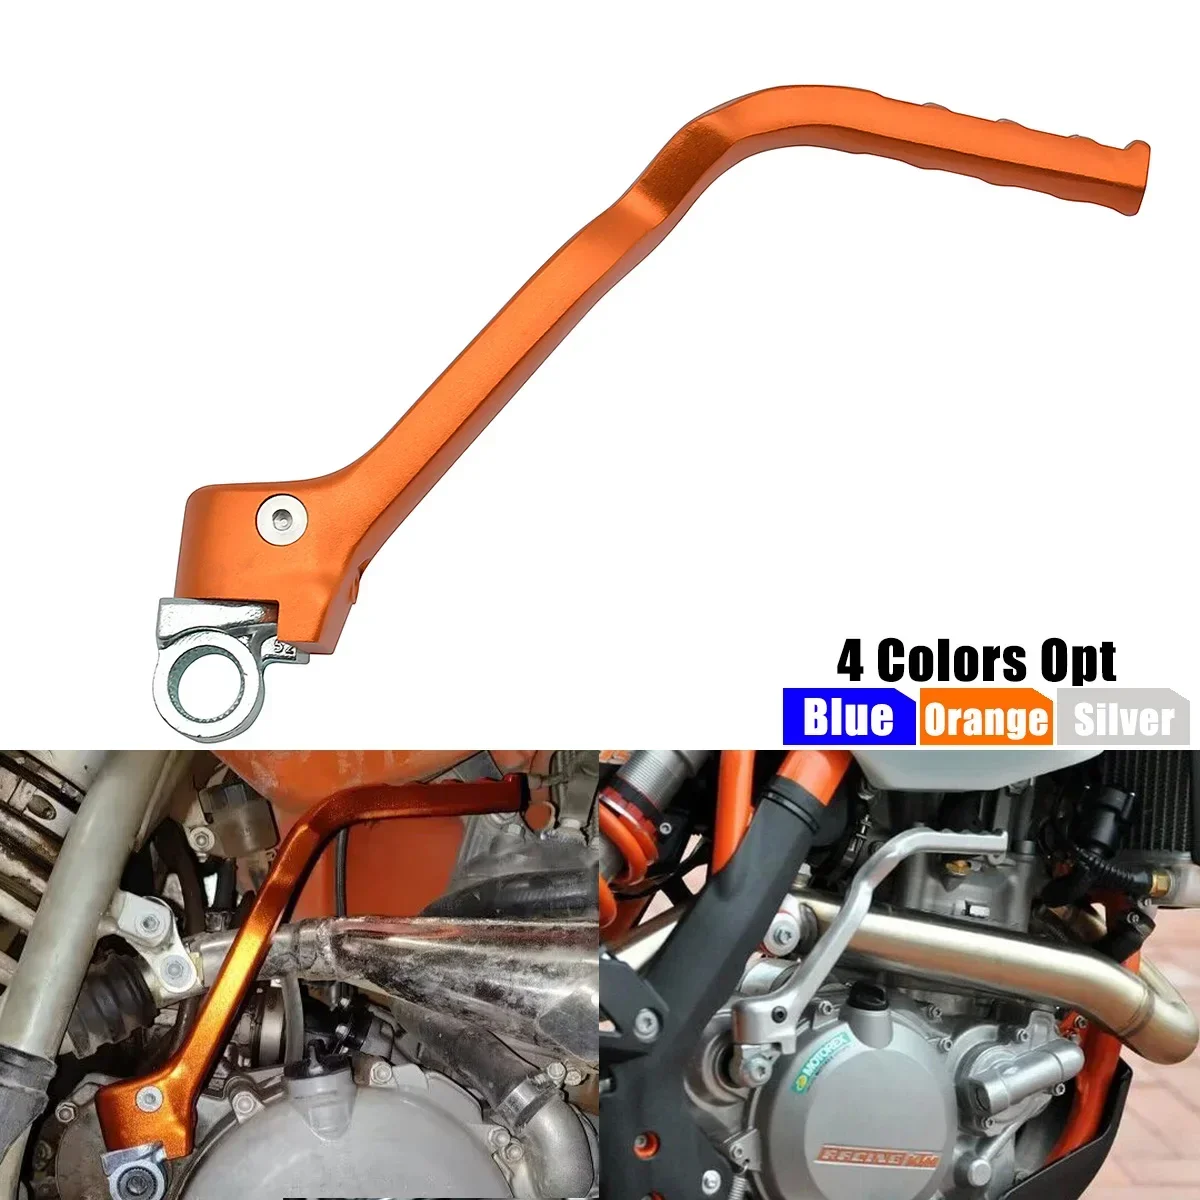 

Motorcycle Kick Start Starter Lever Pedal For EXC EXC-F XC XC-F XCW XCW-F SX SX-F 250 300 1998-2020 For Husqvarna TE250 TE300